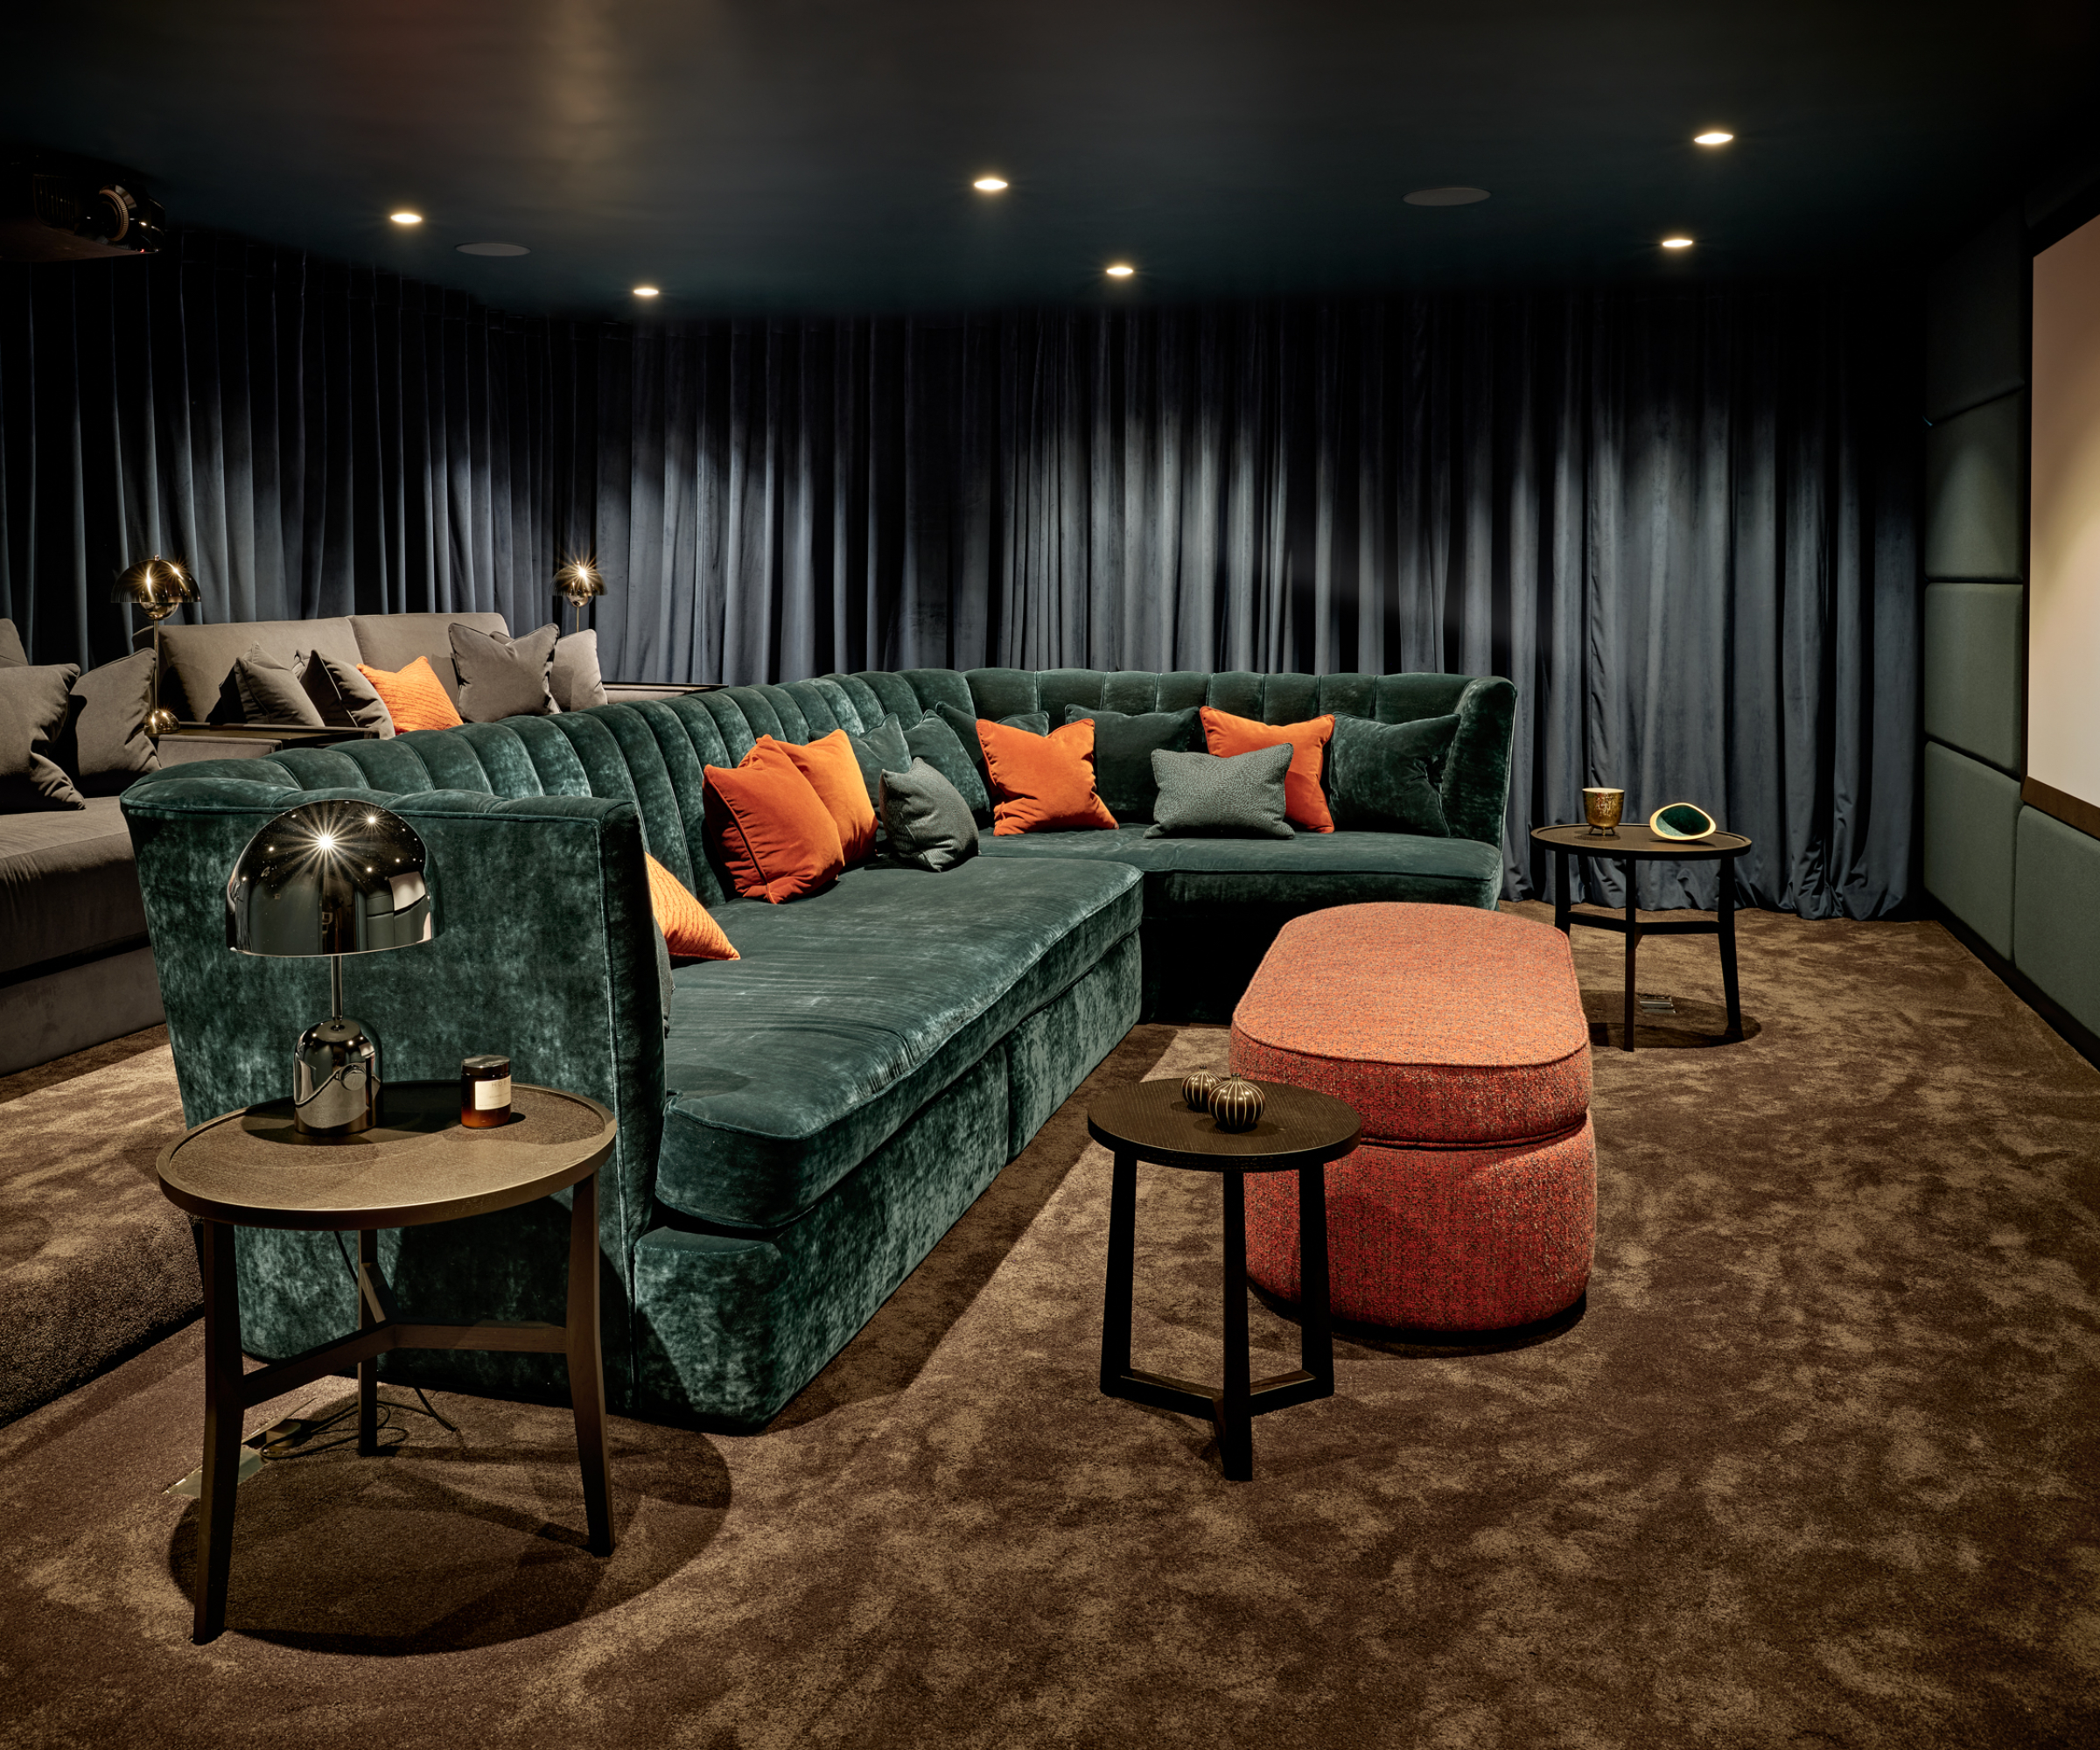 cinema room with two levels of sofa seating in green, grey and orange